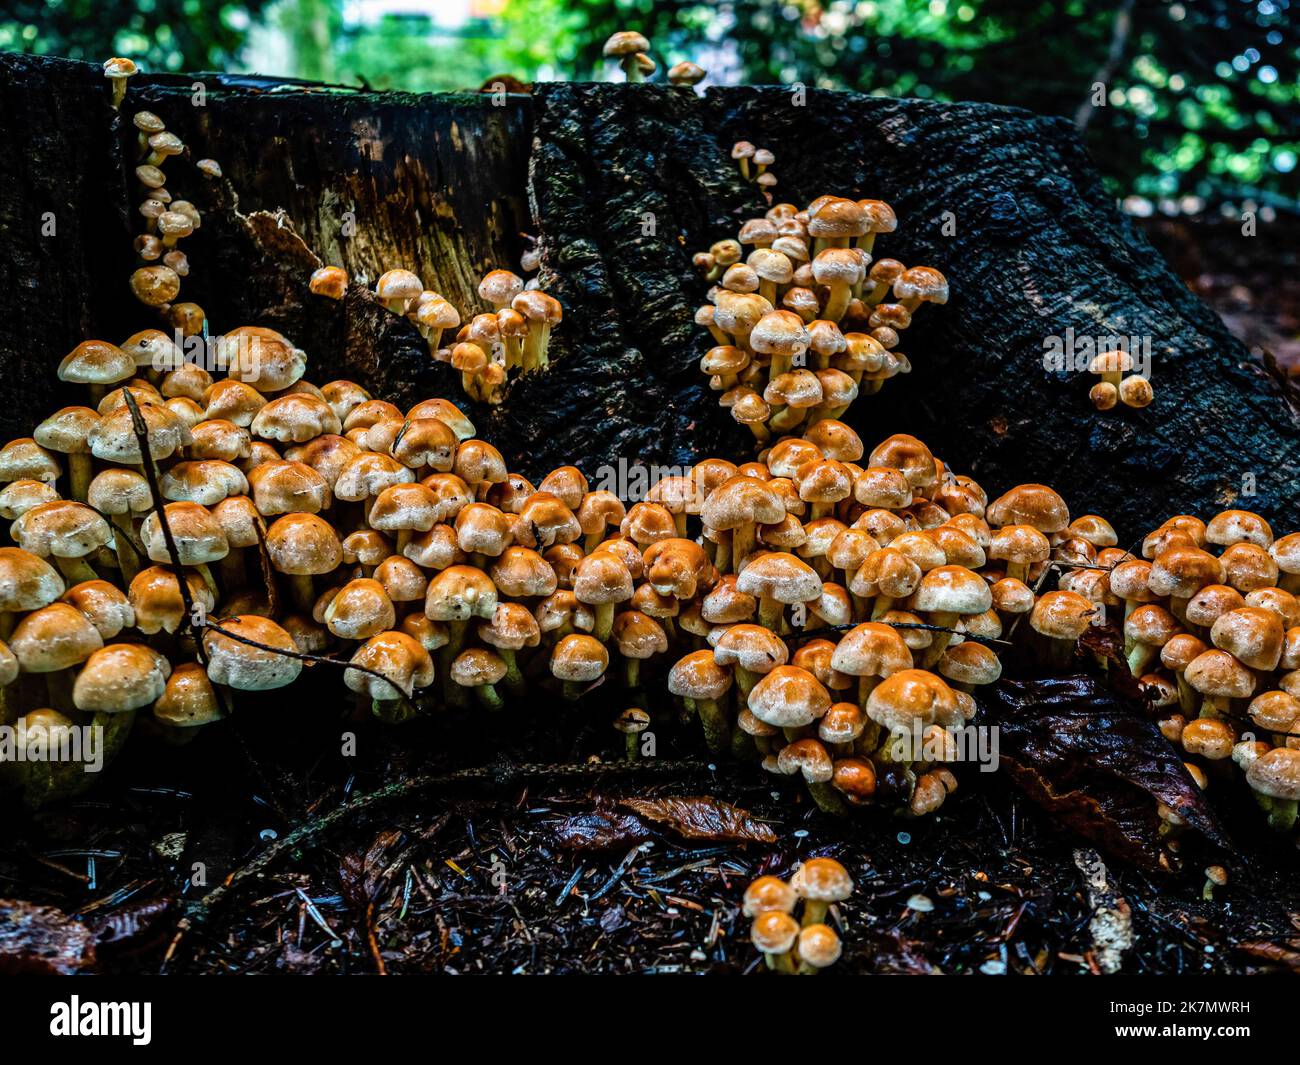 A group of 'Ordinary Sulfur Head' mushrooms is seen growing down on a cutting log. During the autumn season, the landscape in The Netherlands is flooded with green, ochre, golden and reddish colors surrounded by different species of mushrooms. There are around 5,250 species of mushrooms in the Netherlands. It's the perfect season to take pictures of nature and enjoy the marvelous sights. Many of these are under serious threat and some 200 species have become extinct in the Netherlands over recent decades. (Photo by Ana Fernandez/SOPA Images/Sipa USA) Stock Photo